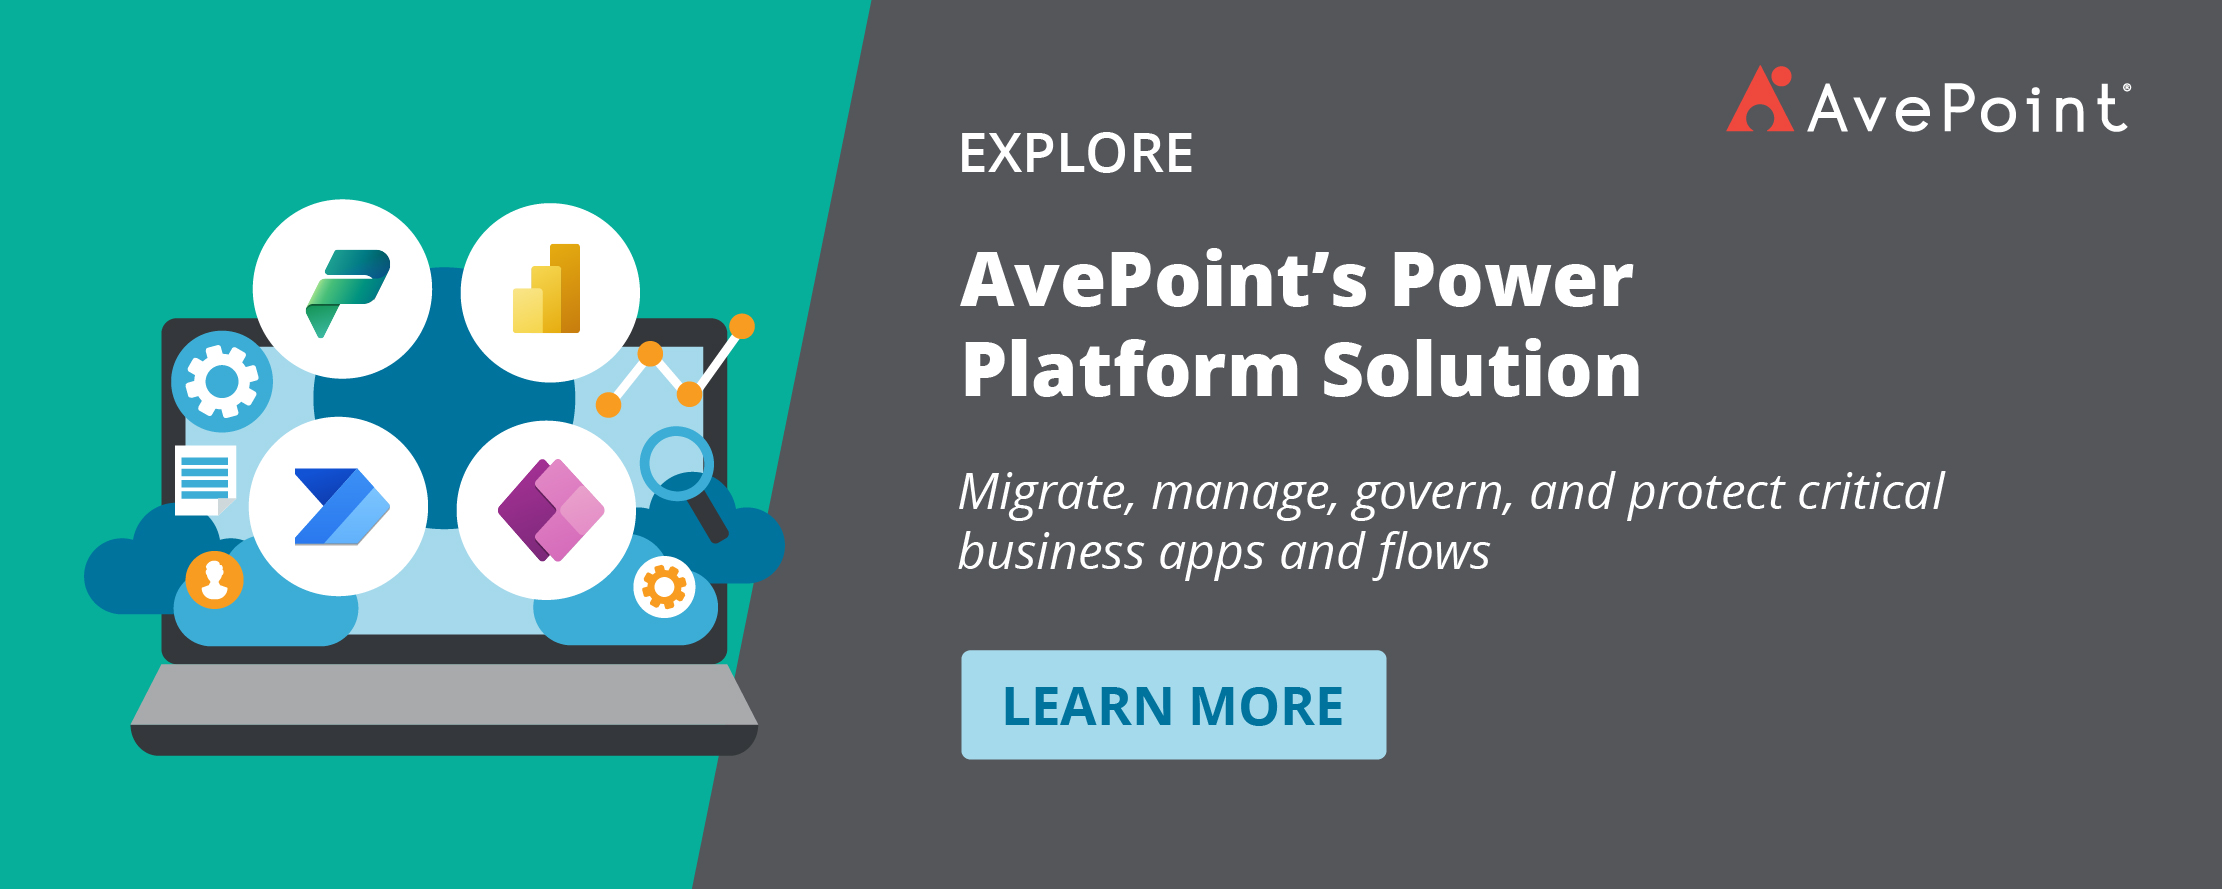 AvePoints Power Platform Solution learn more